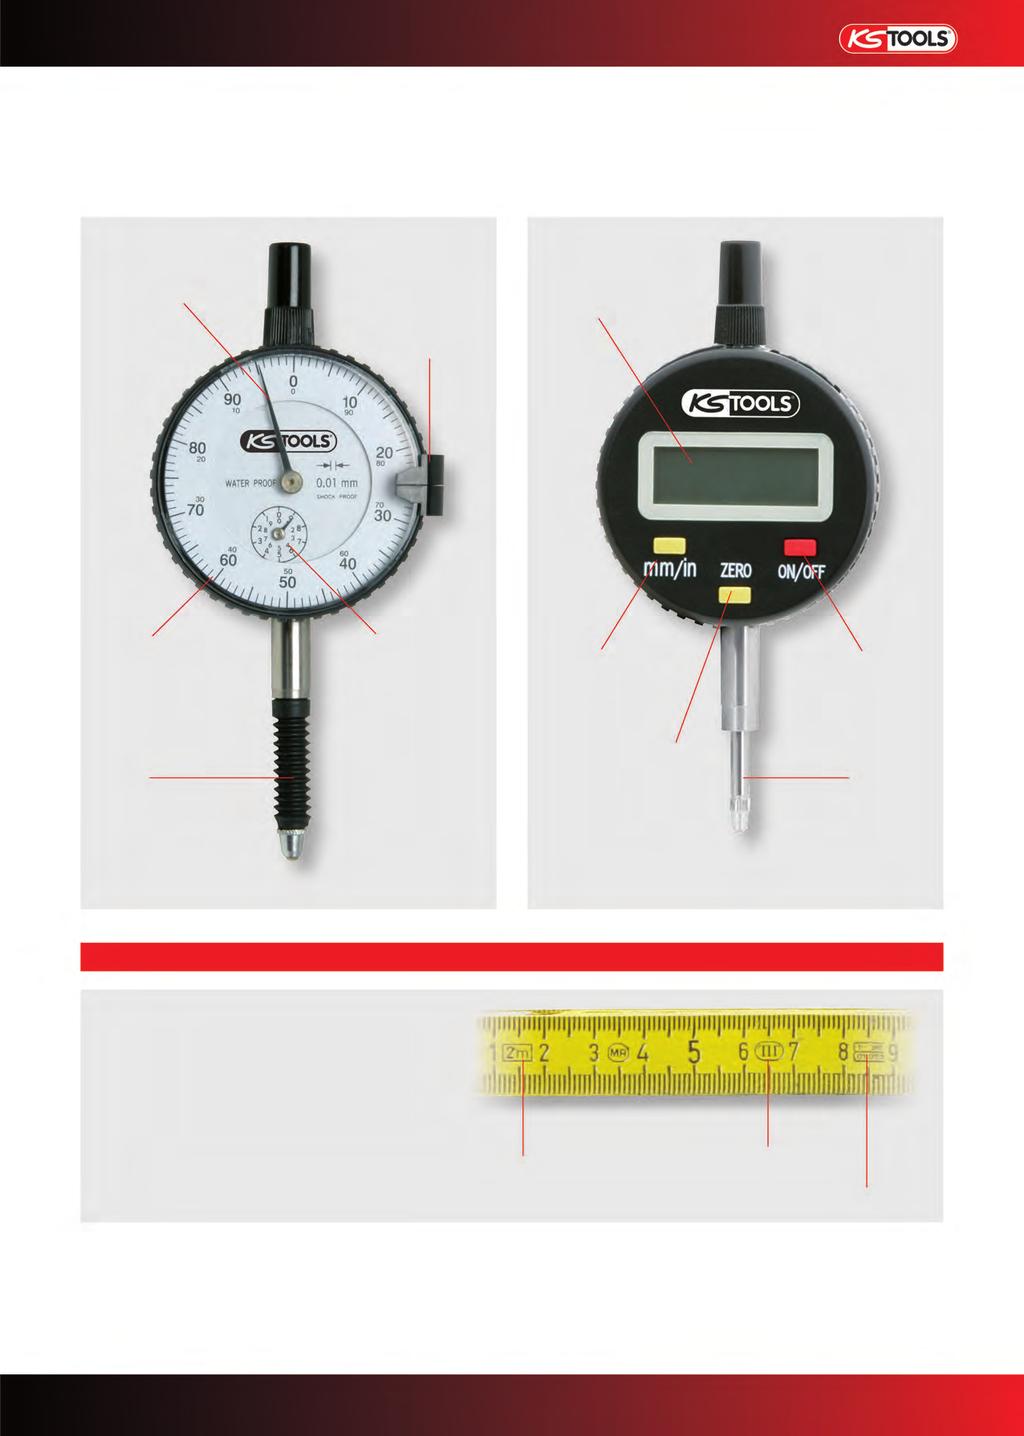 Construction of the dial indicator gauge Dial indicator LCD Readout: on the dial indicator Adjustable tolerance marker Line scale Revolution counter mm / imperial switch On and off switch Spindle